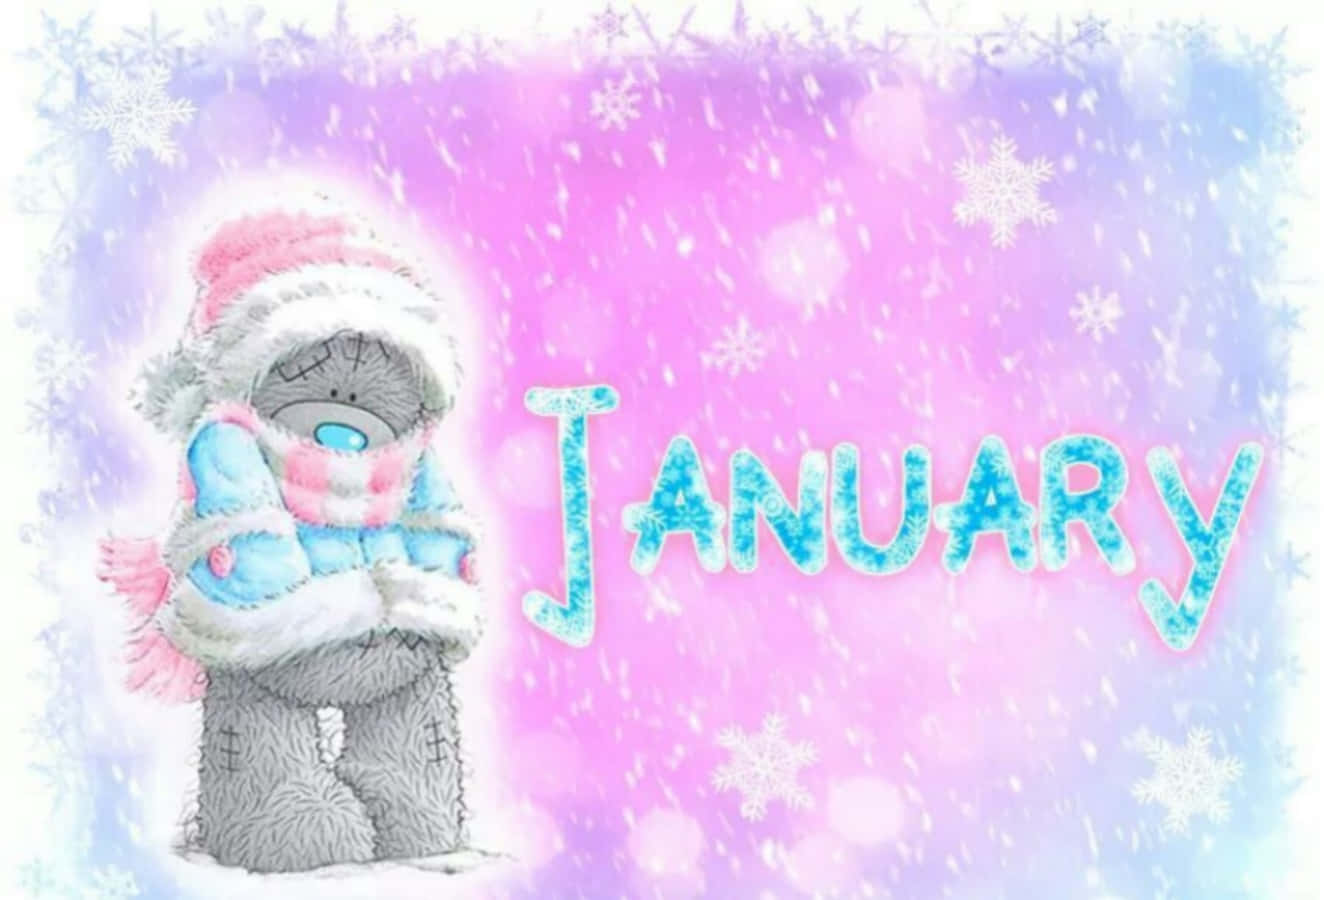 Welcome January with warm hugs and lots of cuteness! Wallpaper